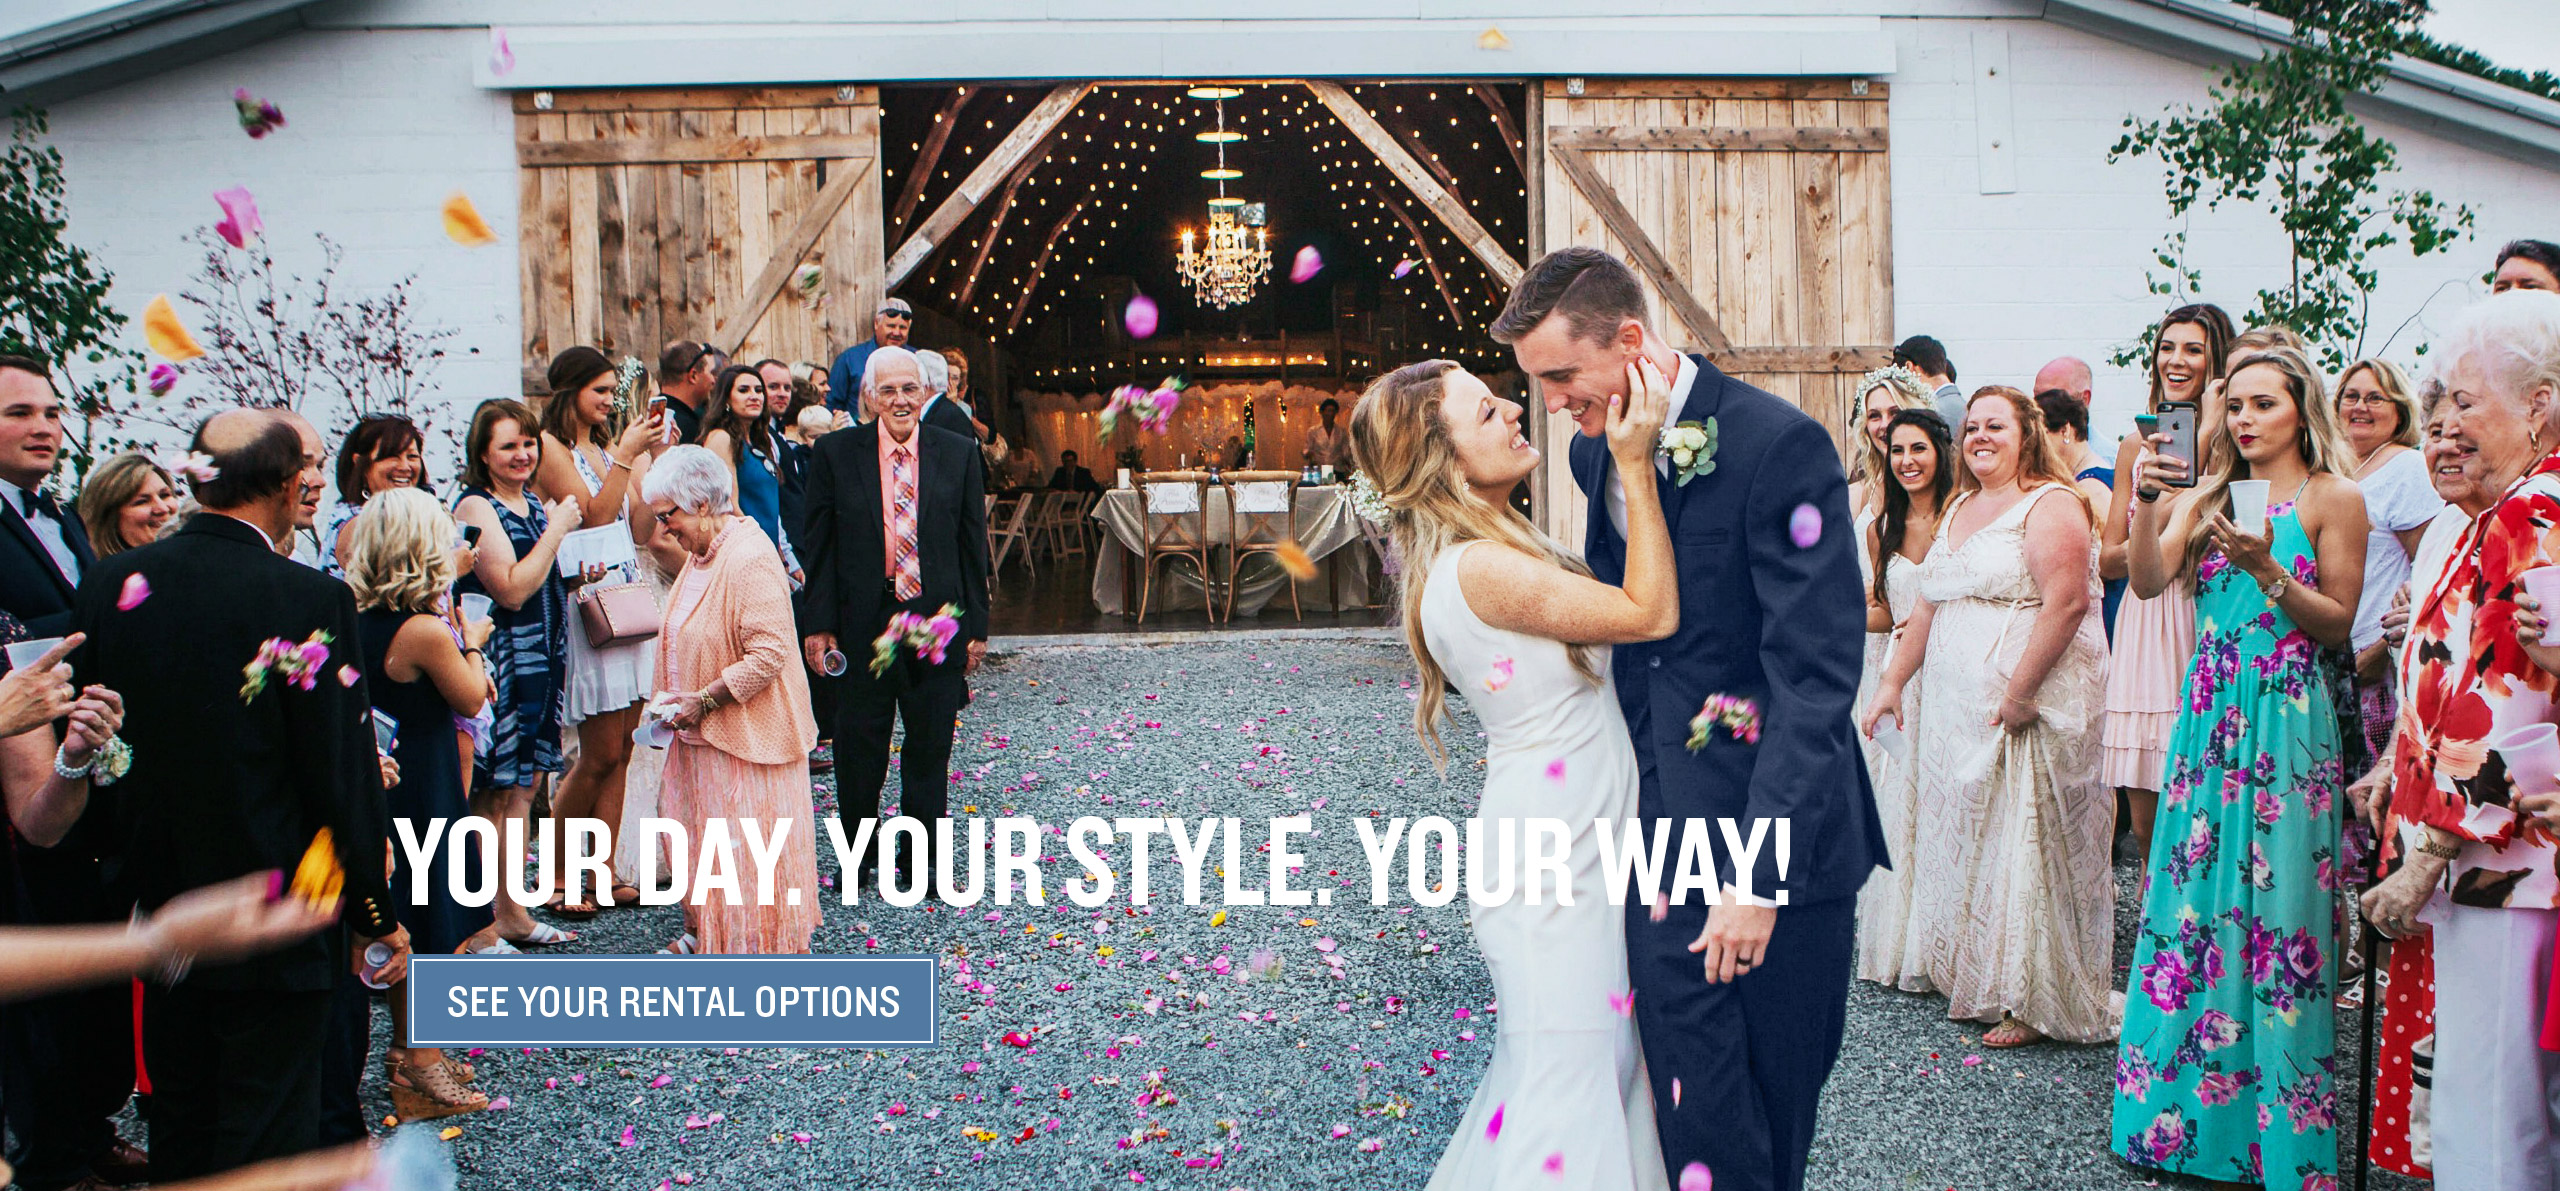 Choose a personalized tuxedo rental option best for you.